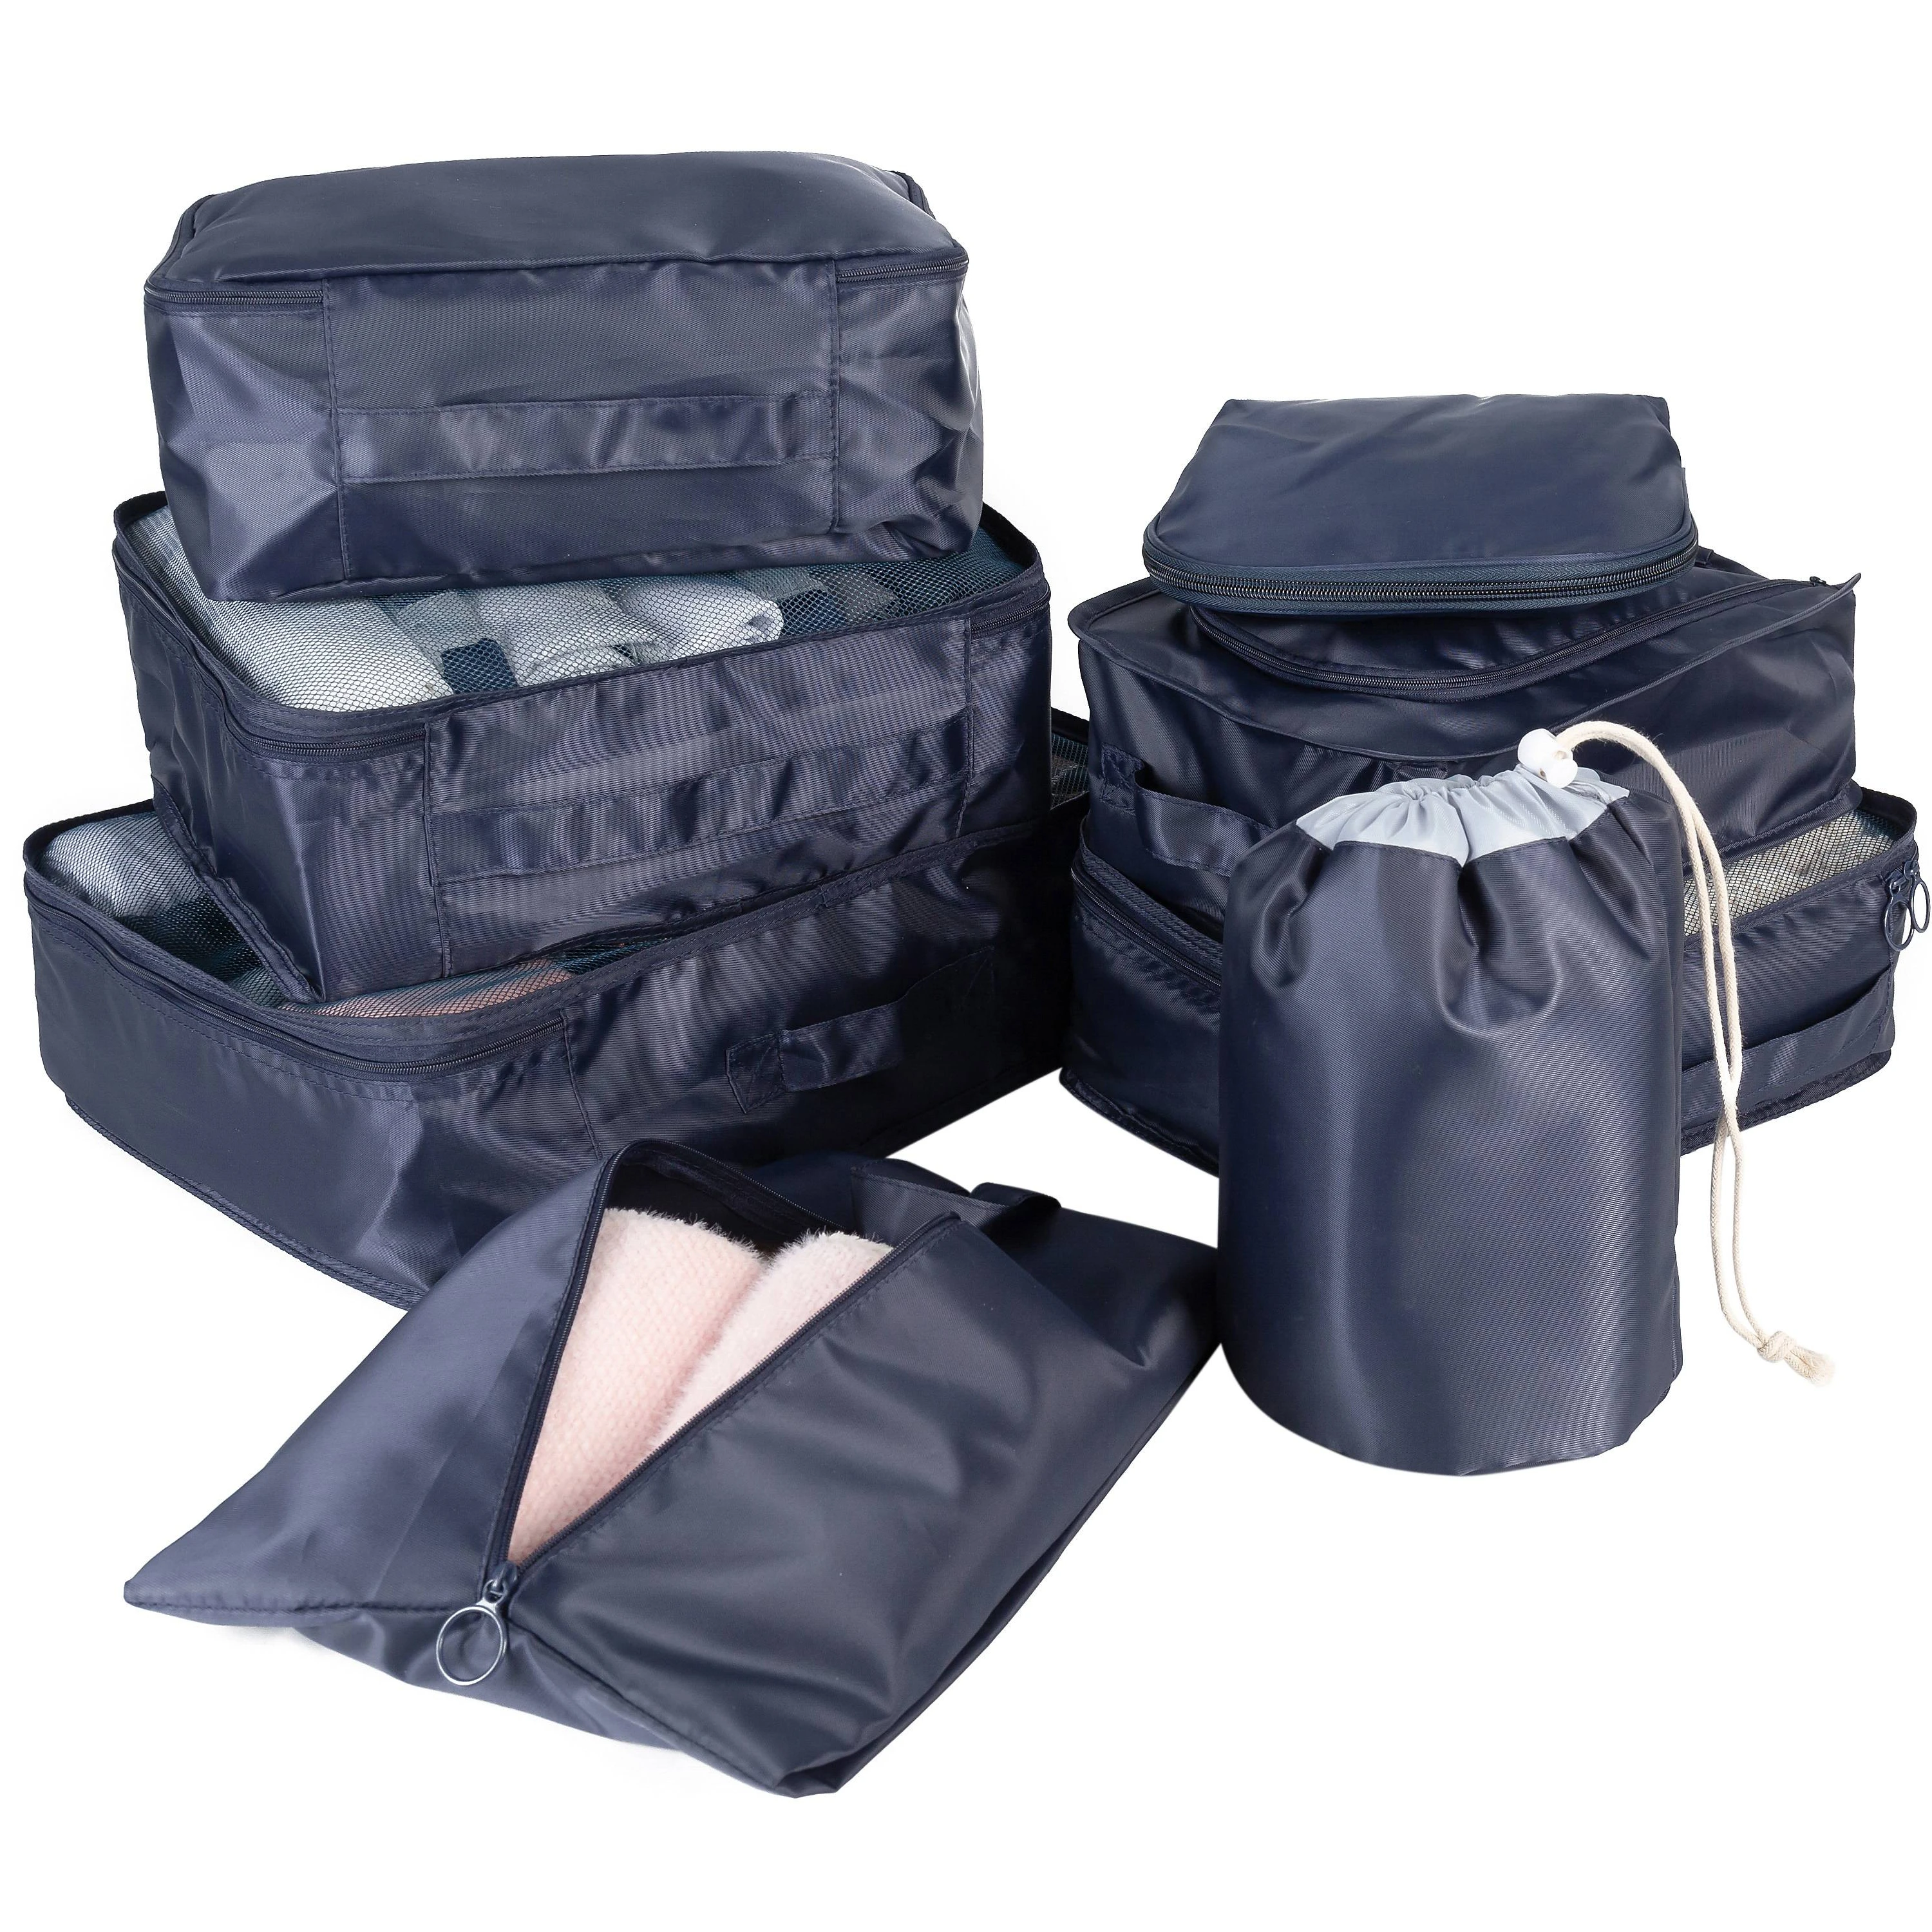 Travel Luggage Packing Organizers 8Pcs compression Packing Cubes with Shoe Bag and Toiletry Bag